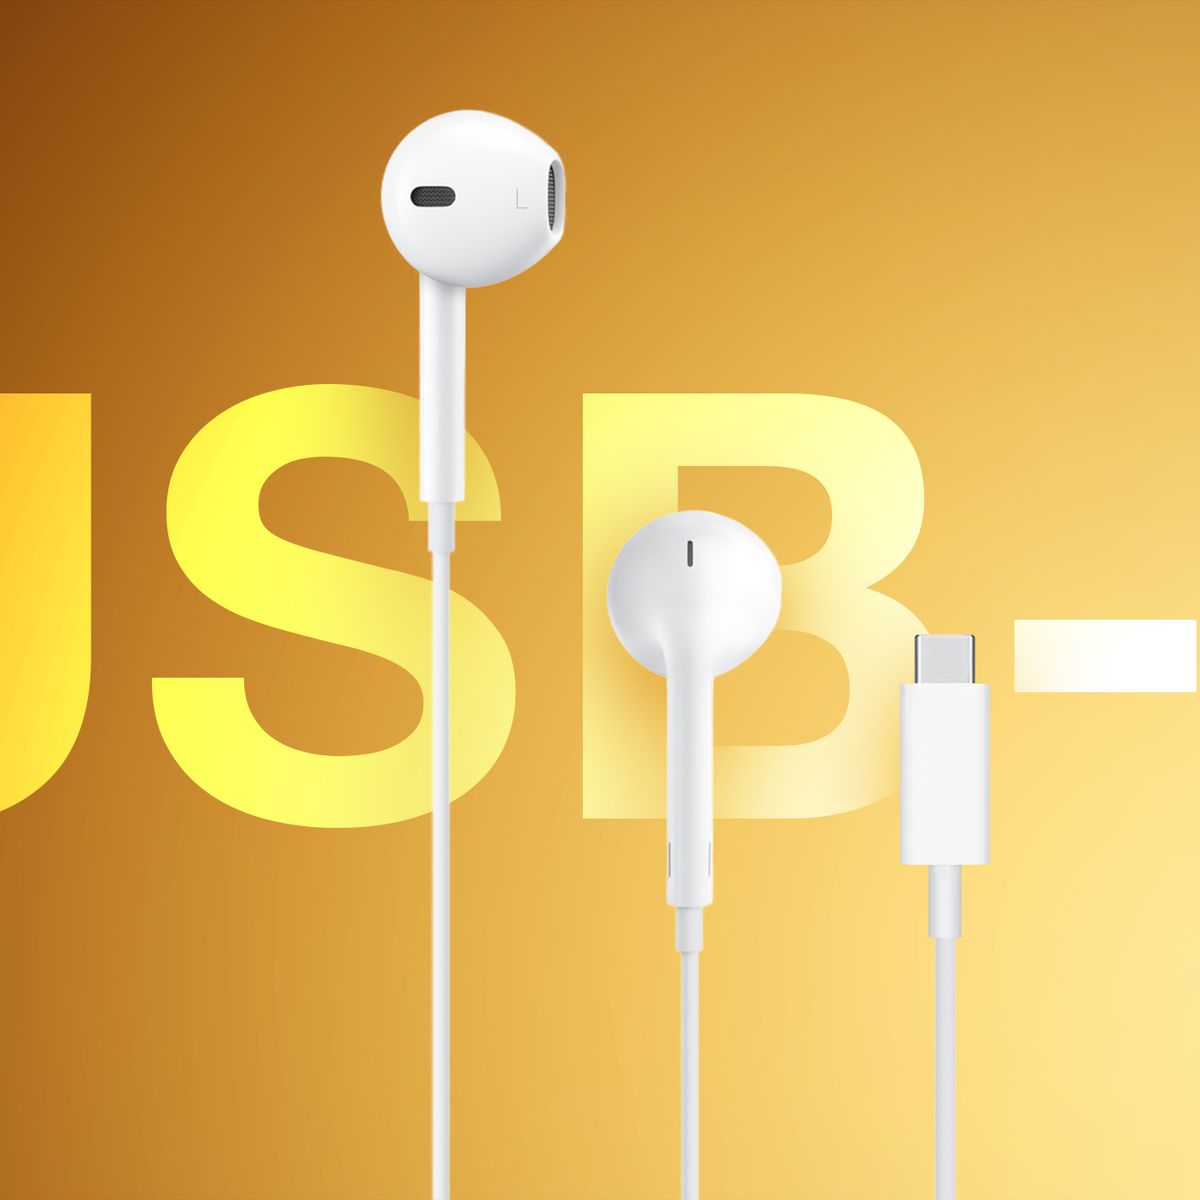 Apple is Working on USB Type-C Wired EarPods for Upcoming iPhones: Report